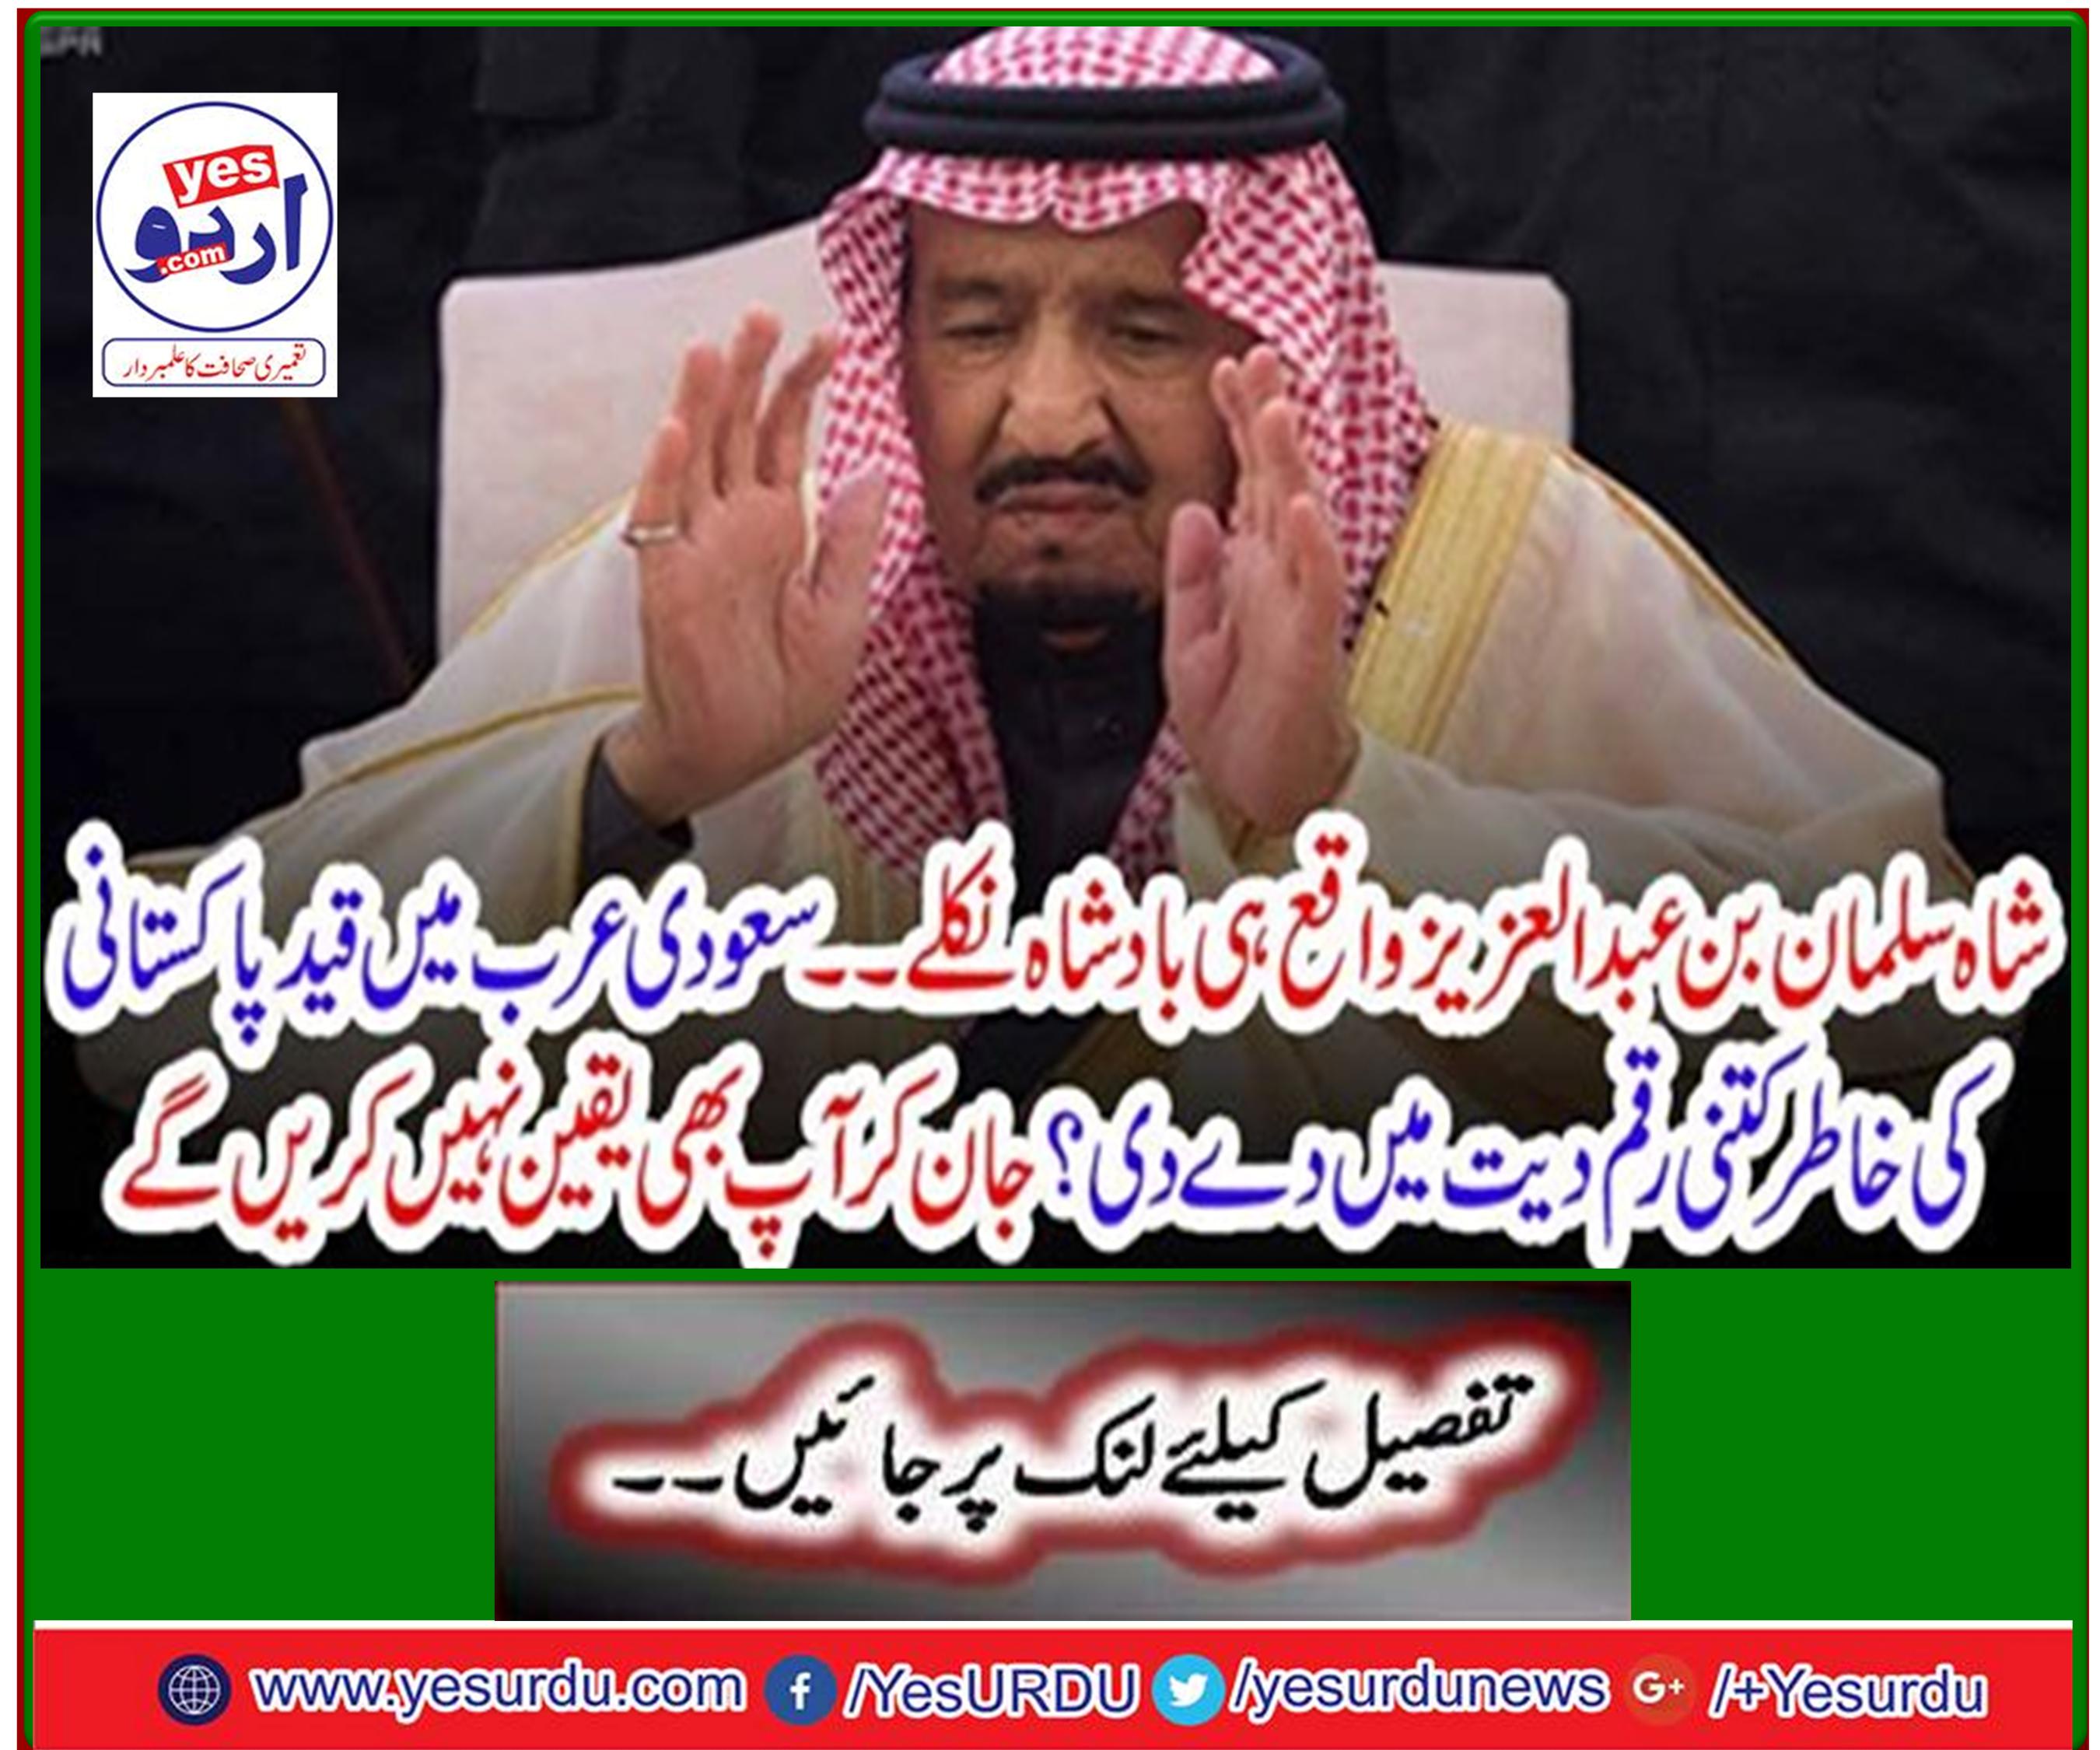 How much money did you donate to Saudi Arabia for the sake of Pakistanis? Knowing you won't even believe